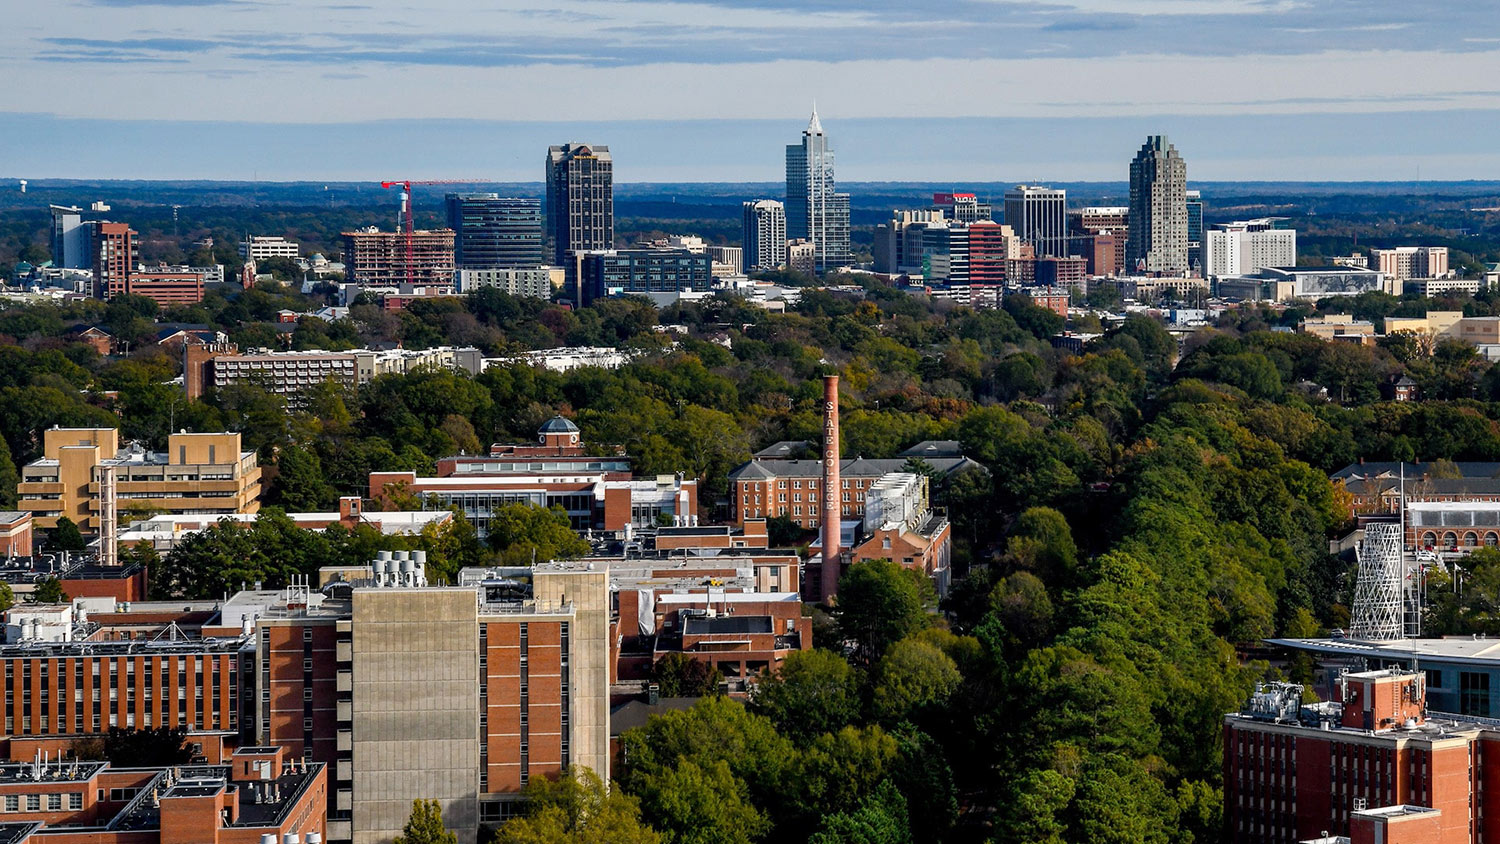 An aerial view of NC State's campus with the Downtown Raleigh skyline behind it.